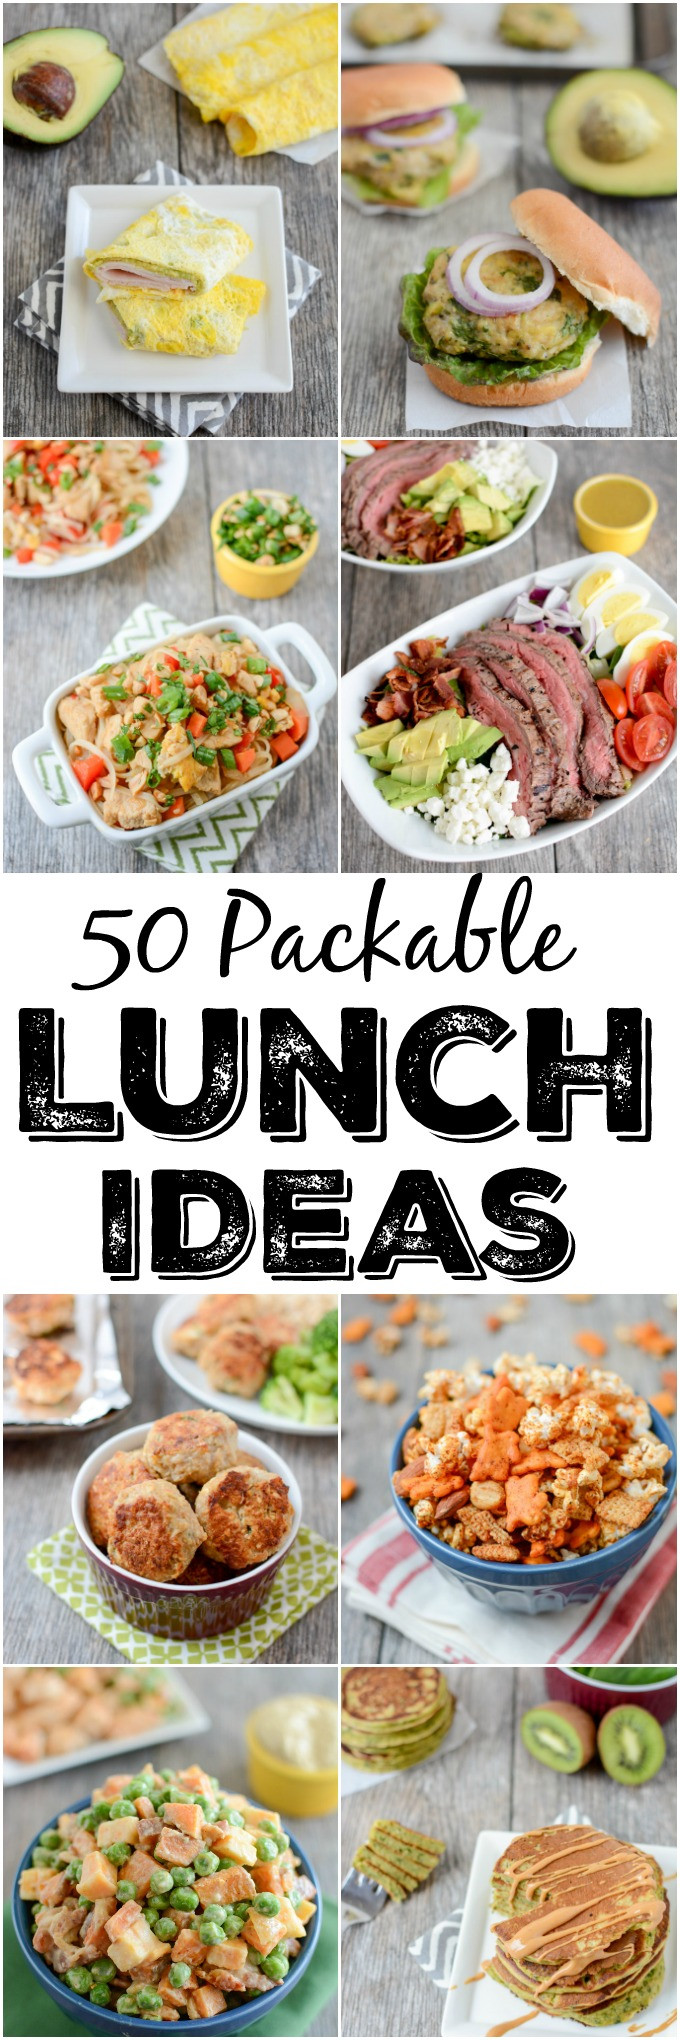 Healthy Packable Lunches
 50 Lunch Ideas for Work